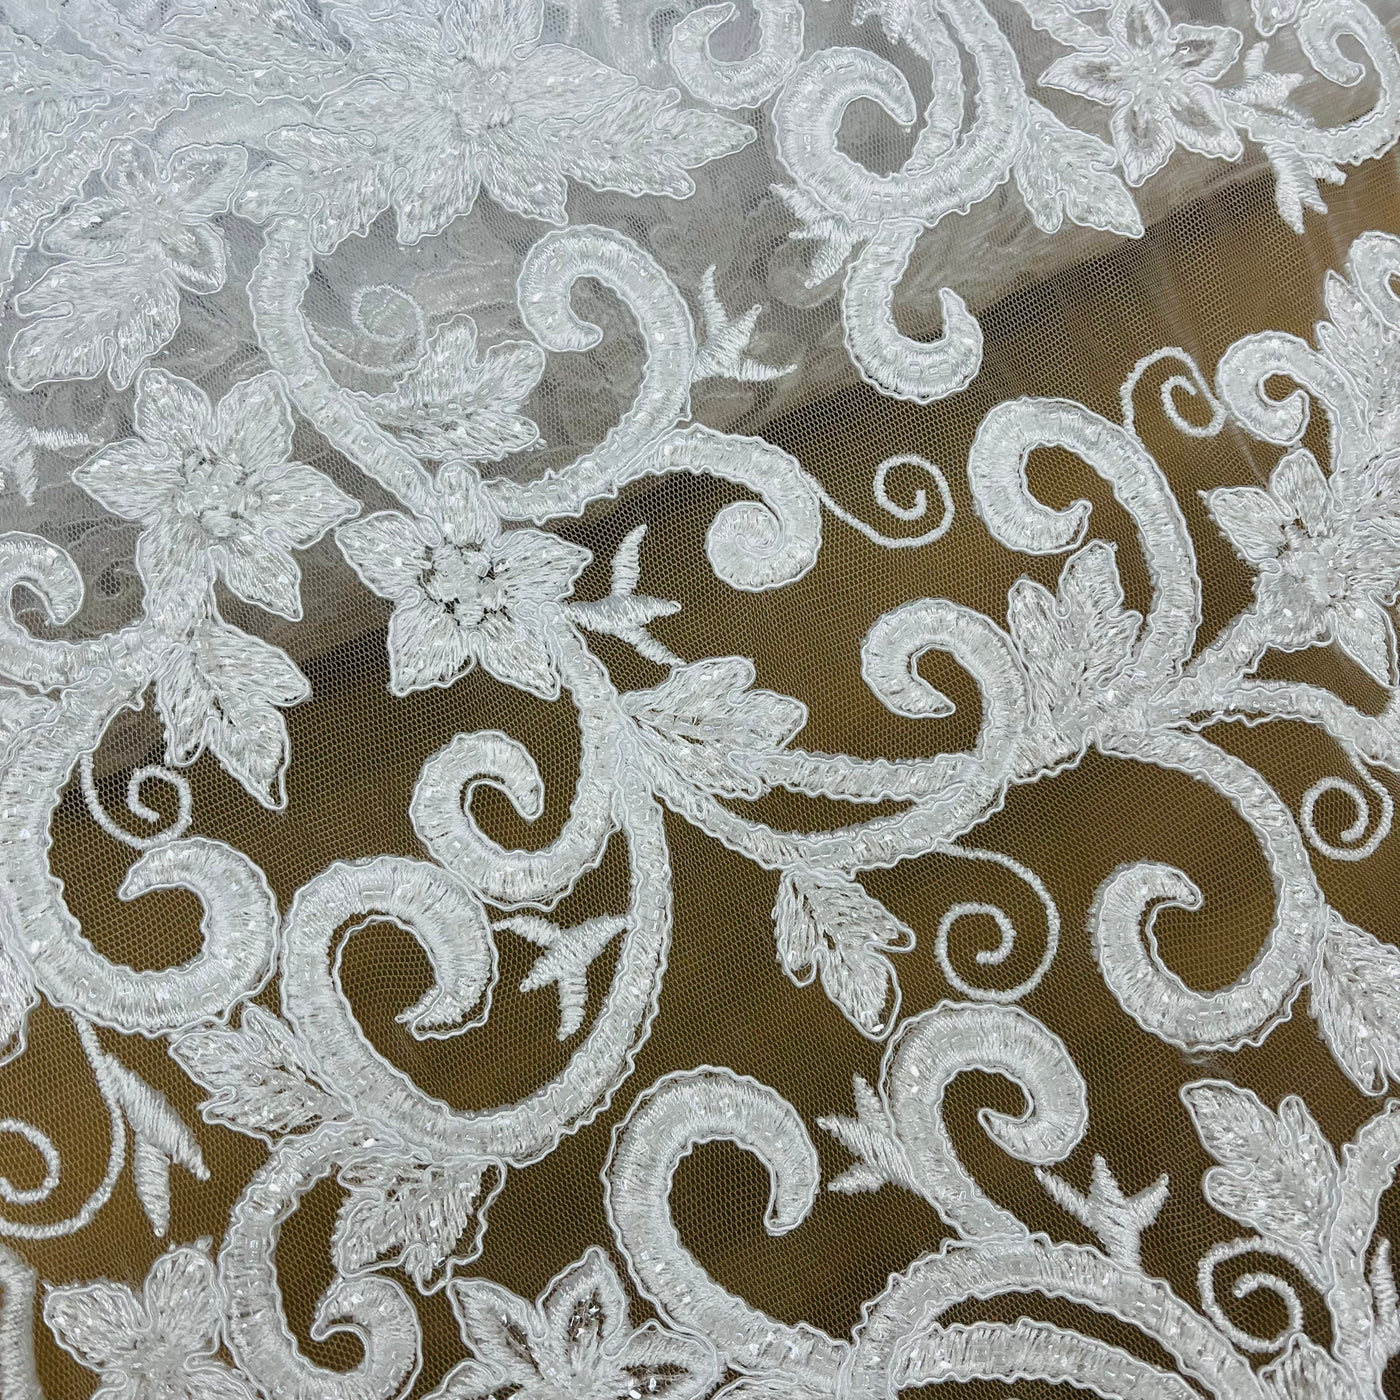 Beaded & Corded Bridal Fabric Lace Embroidered on 100% Polyester Net Mesh | Lace USA